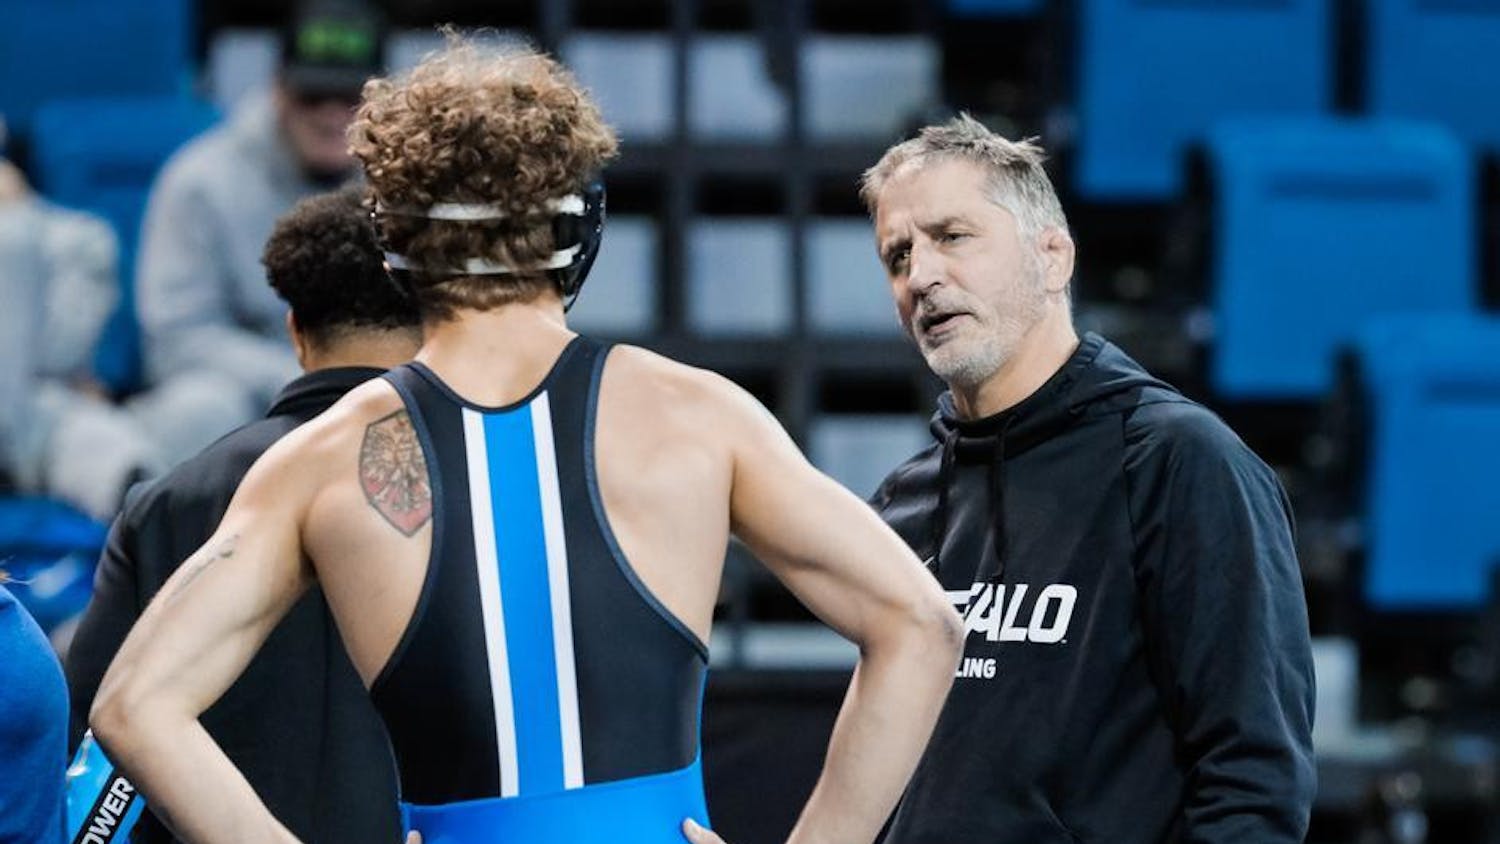 UB wrestling went 10-12 overall in the 2023-24 season under Stutzman's leadership, with a 5-3 record in conference play. &nbsp;